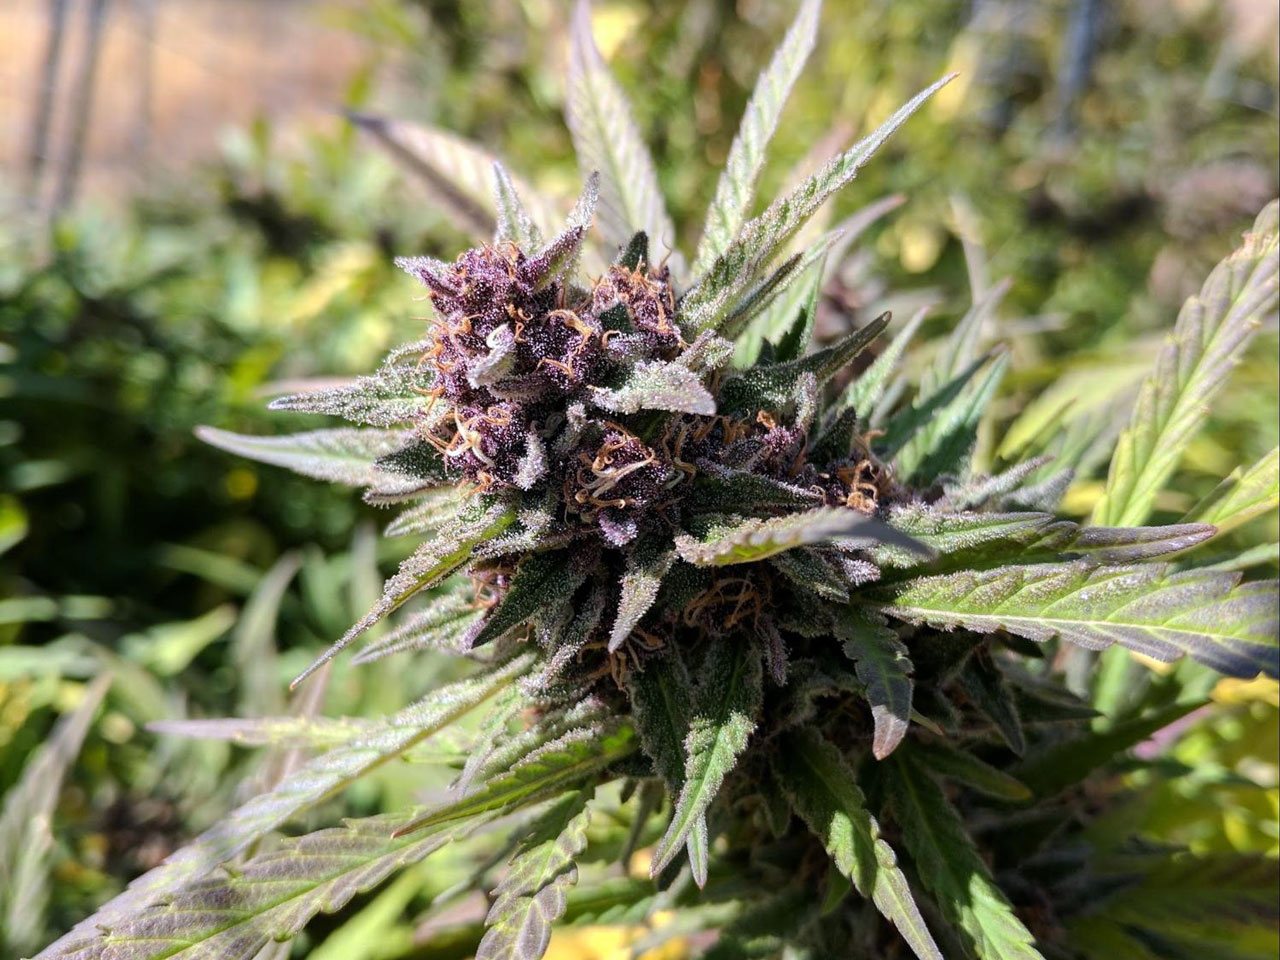 This is also one of the strains with a purple flower and green leafs which ...